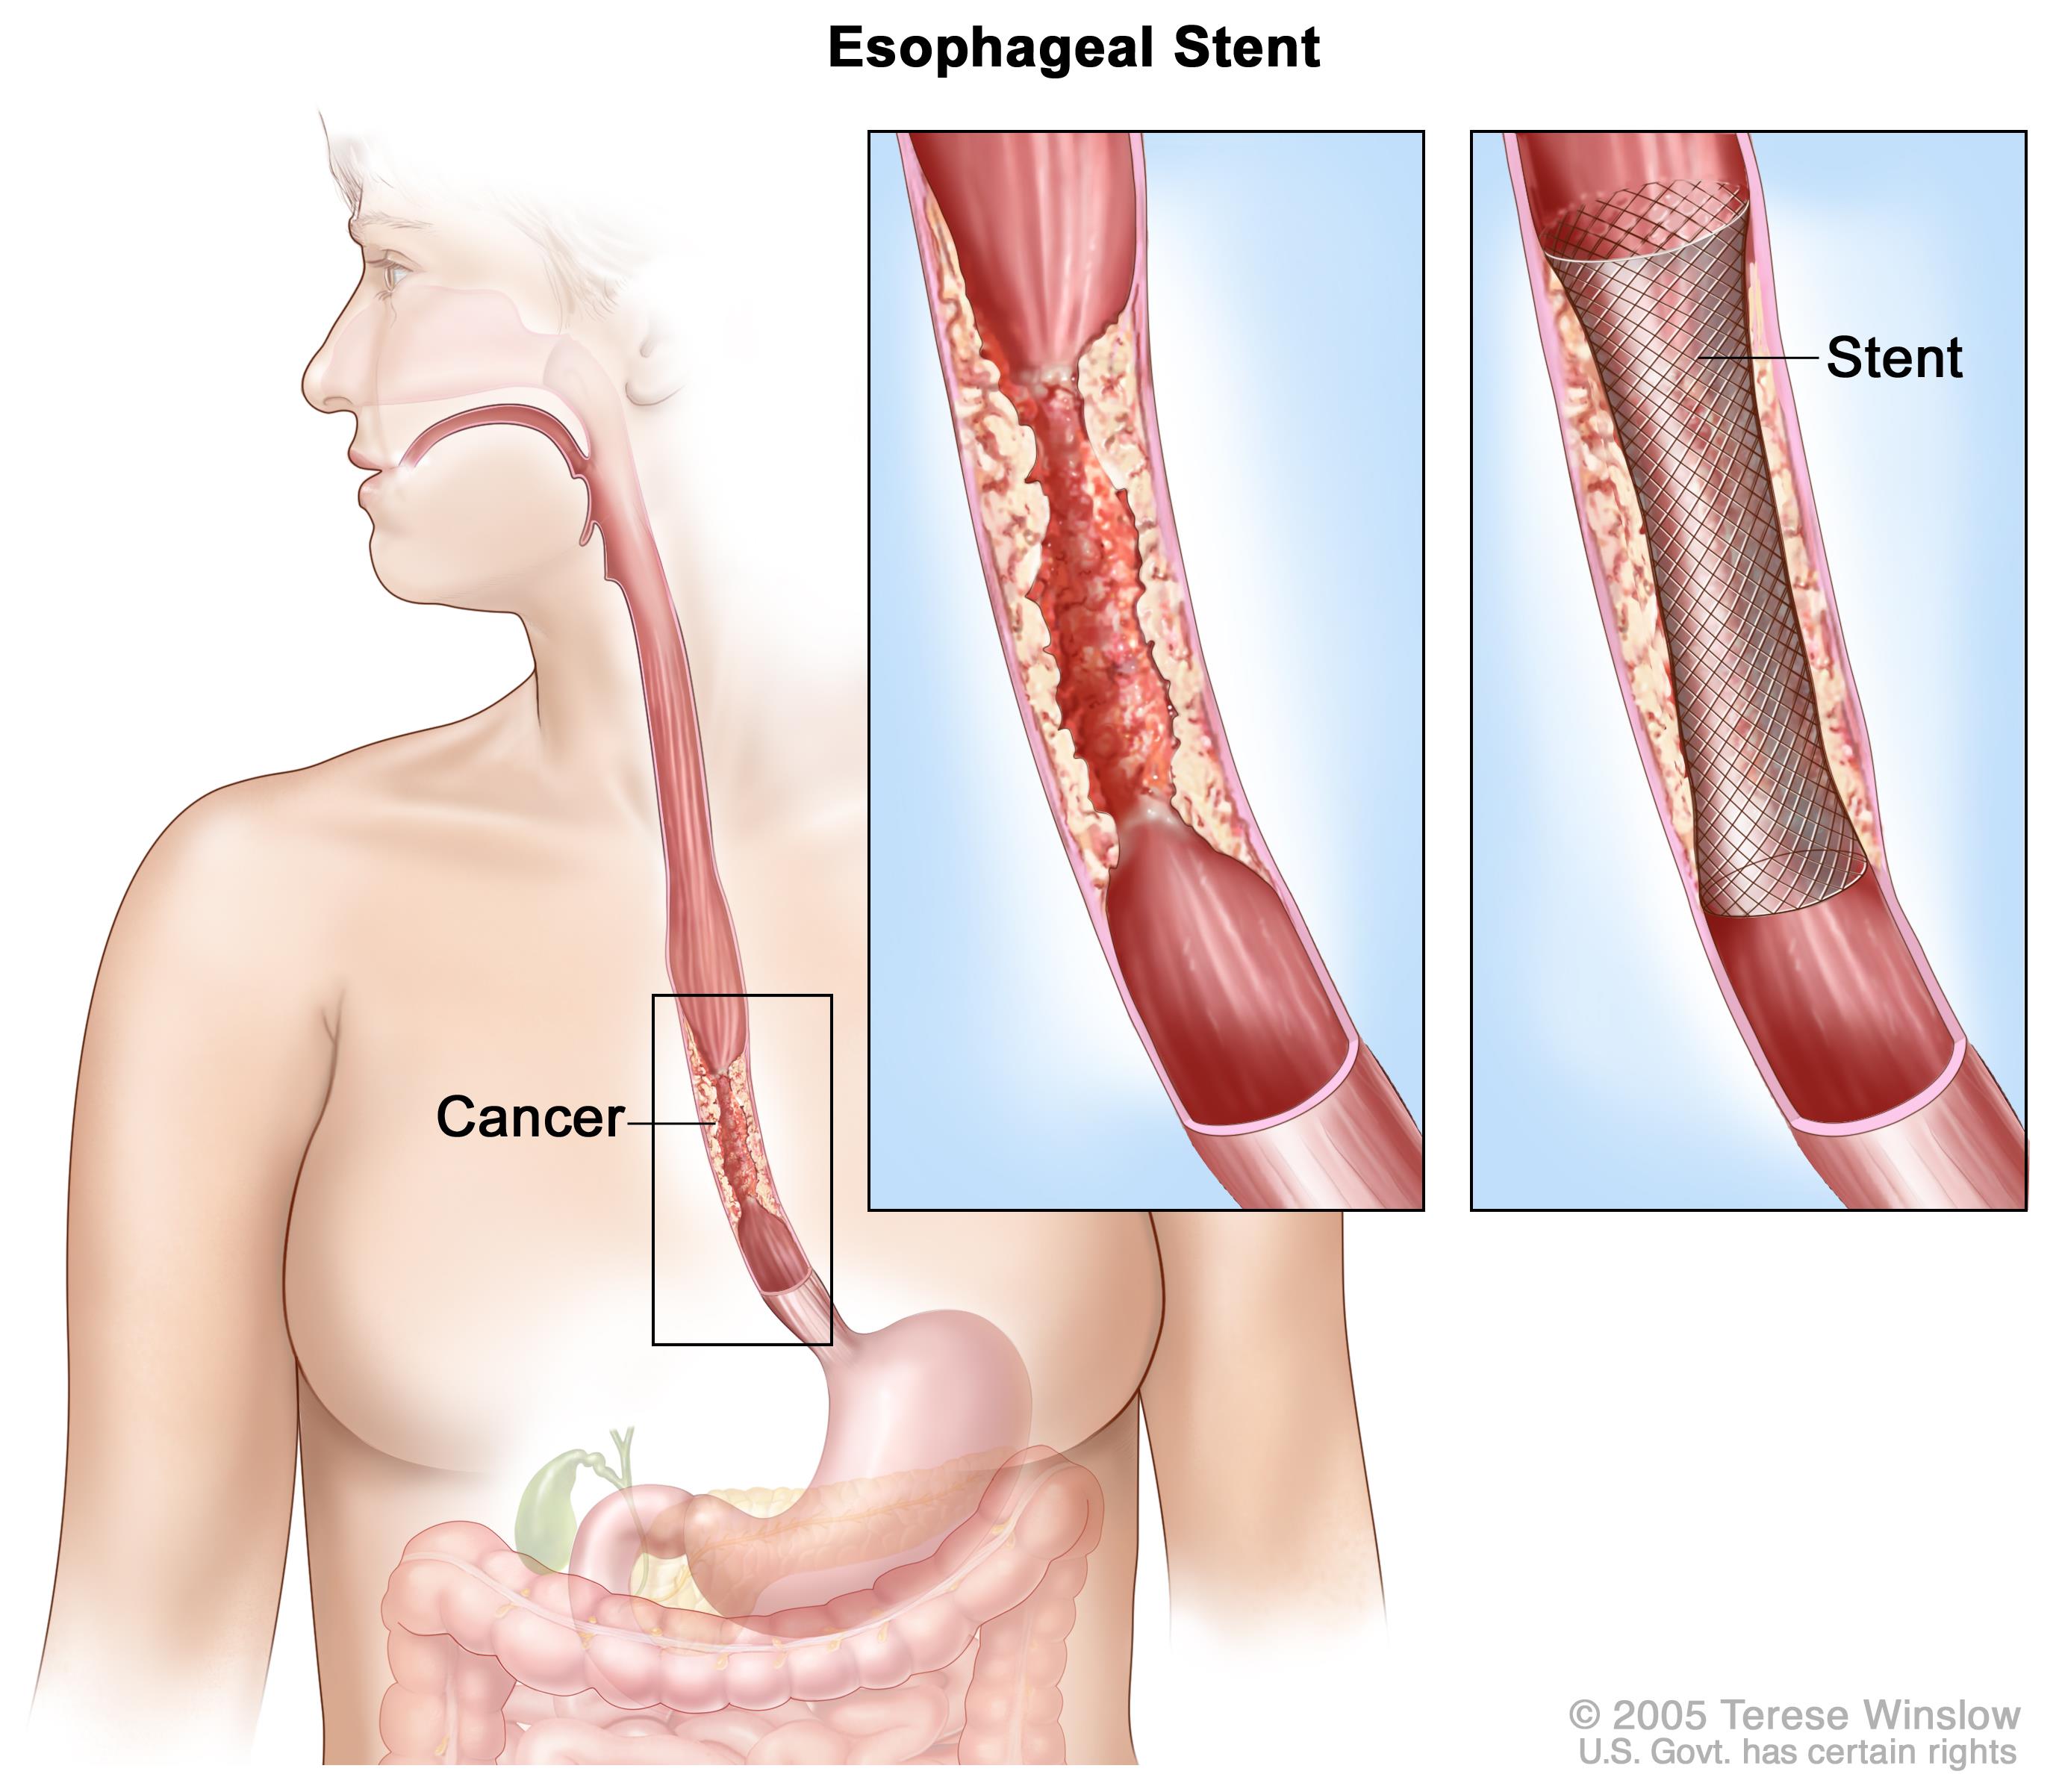 Esophageal Cancer Treatment in Iran